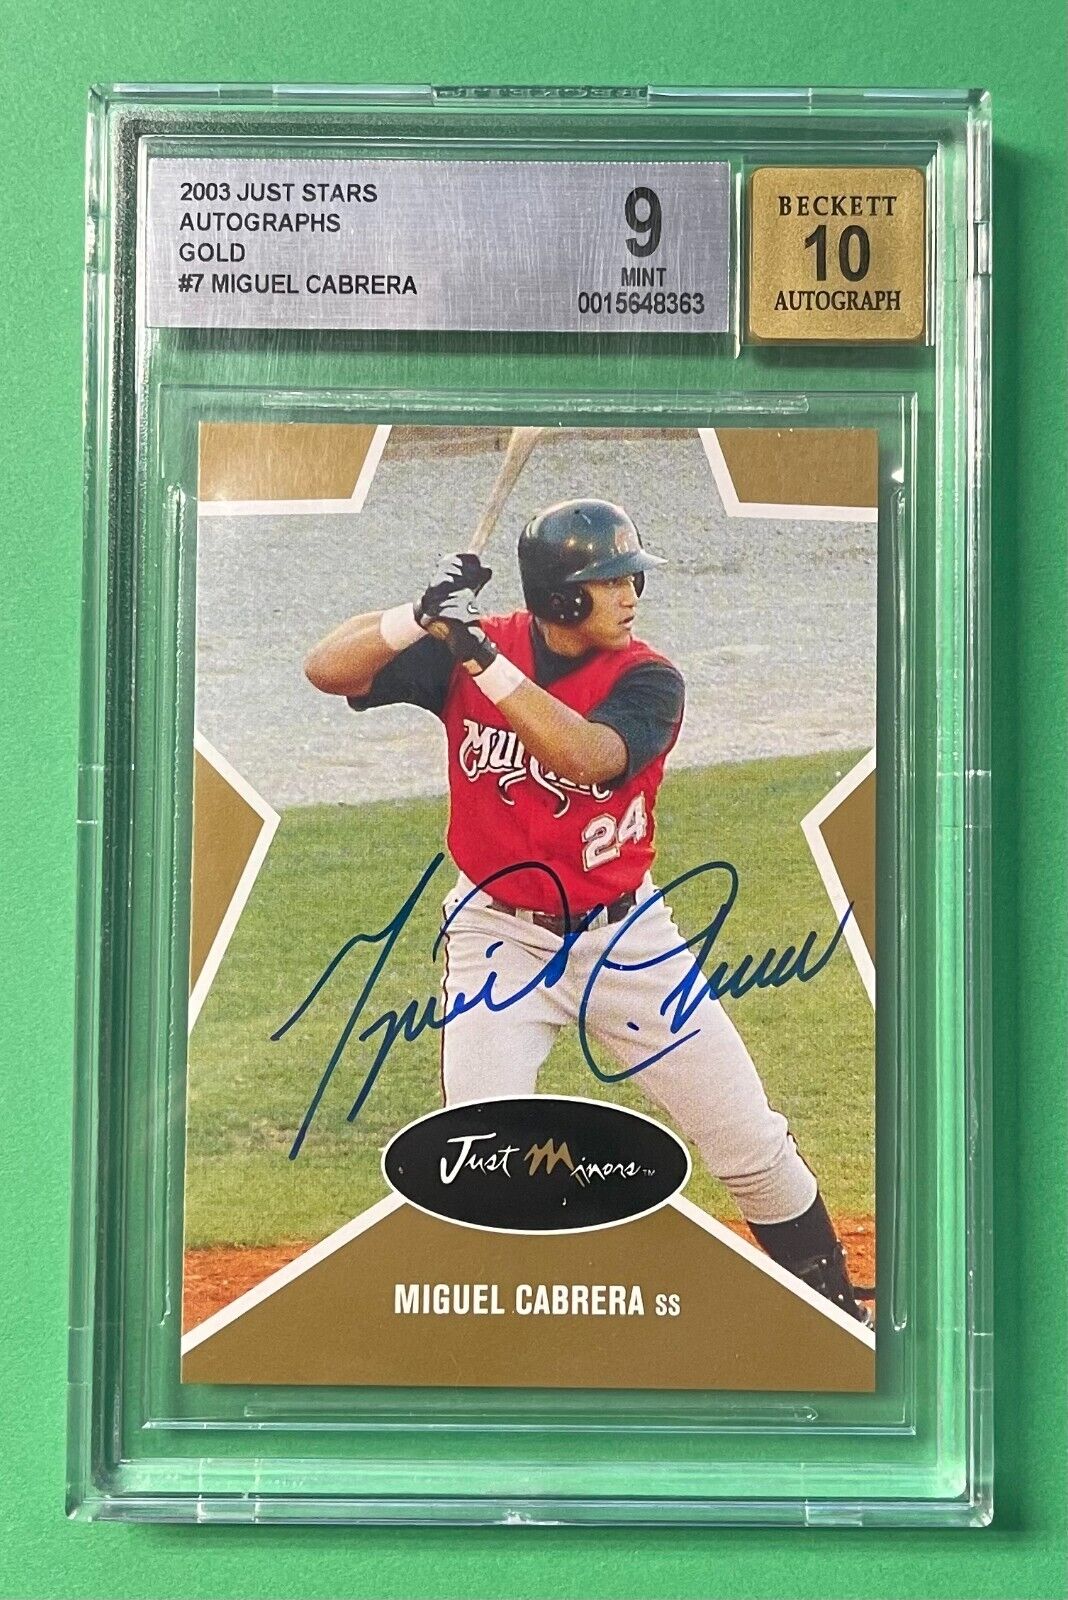 2003 MIGUEL CABRERA JUST MINORS STARS GOLD AUTOGRAPHED #7 BGS 9/10